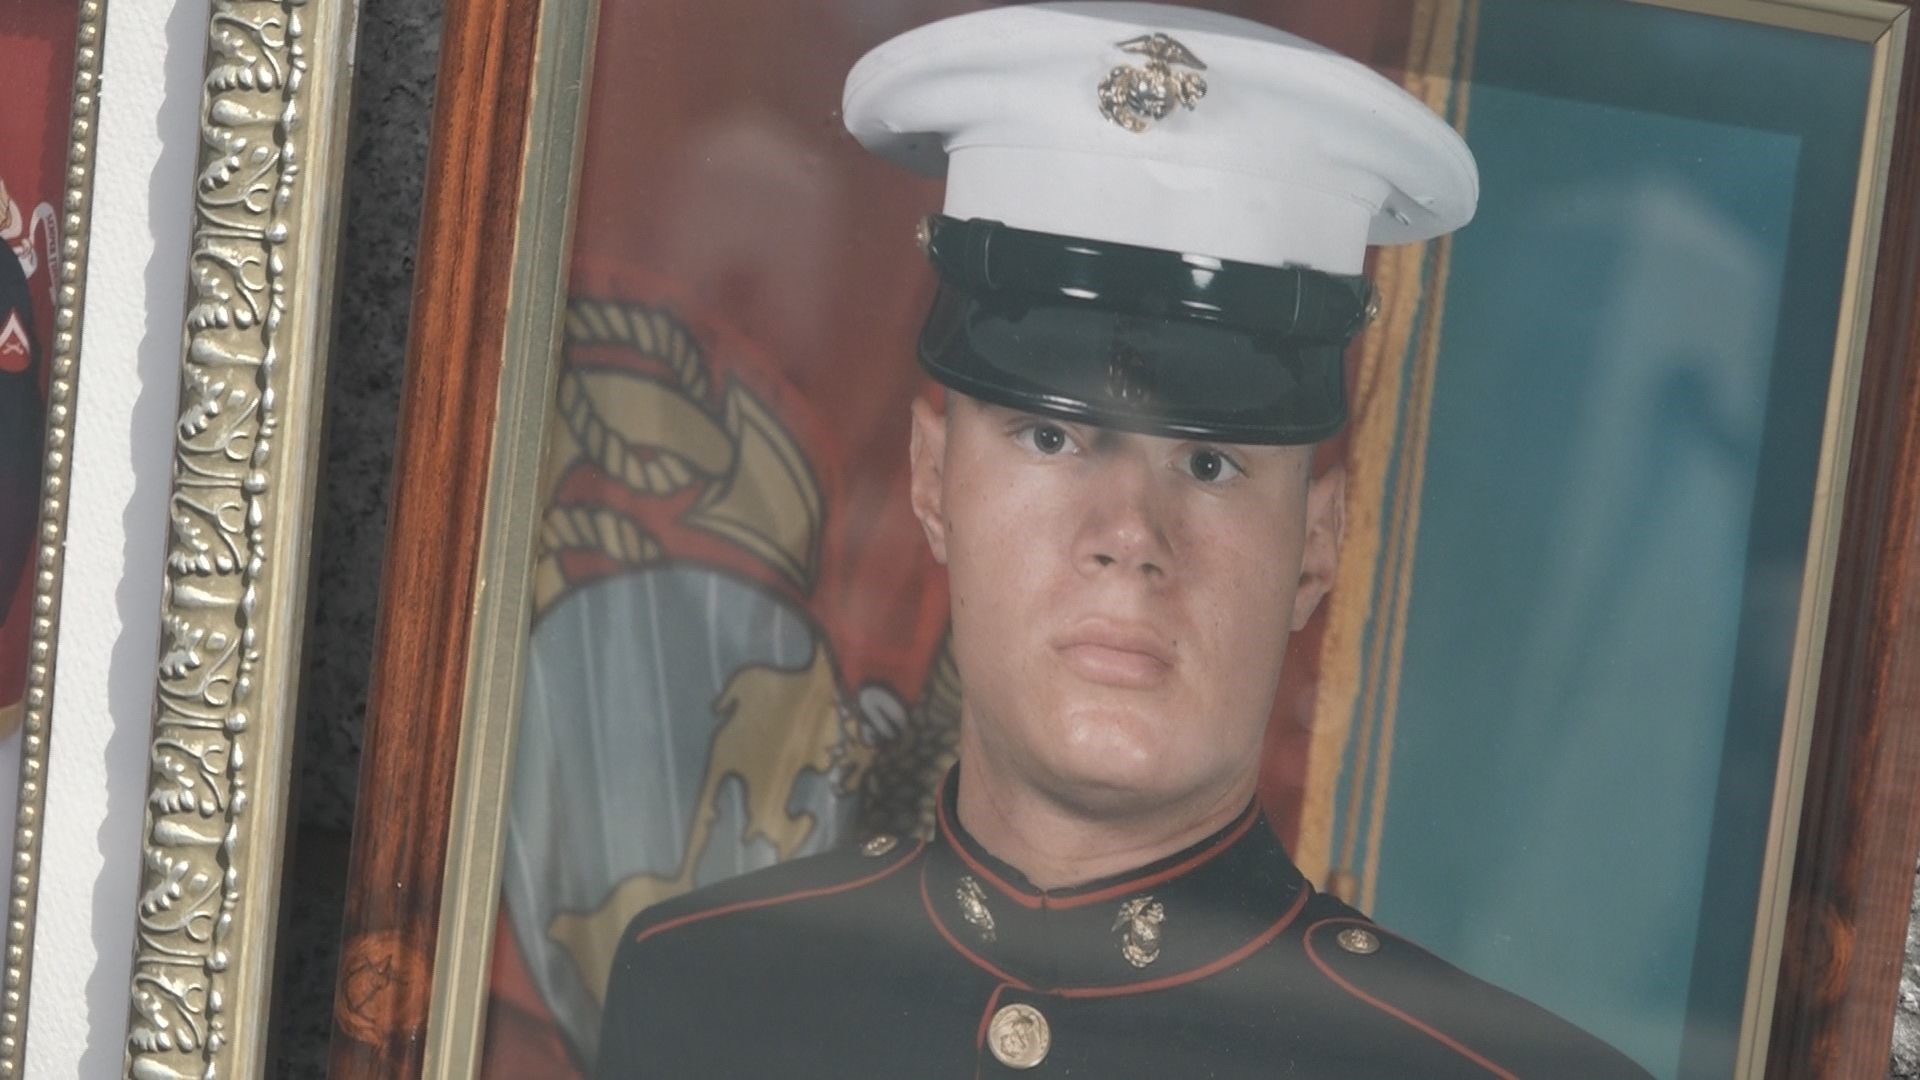 Matthew Wyatt died in 2004. He received a bronze star for his heroism while serving in Iraq.